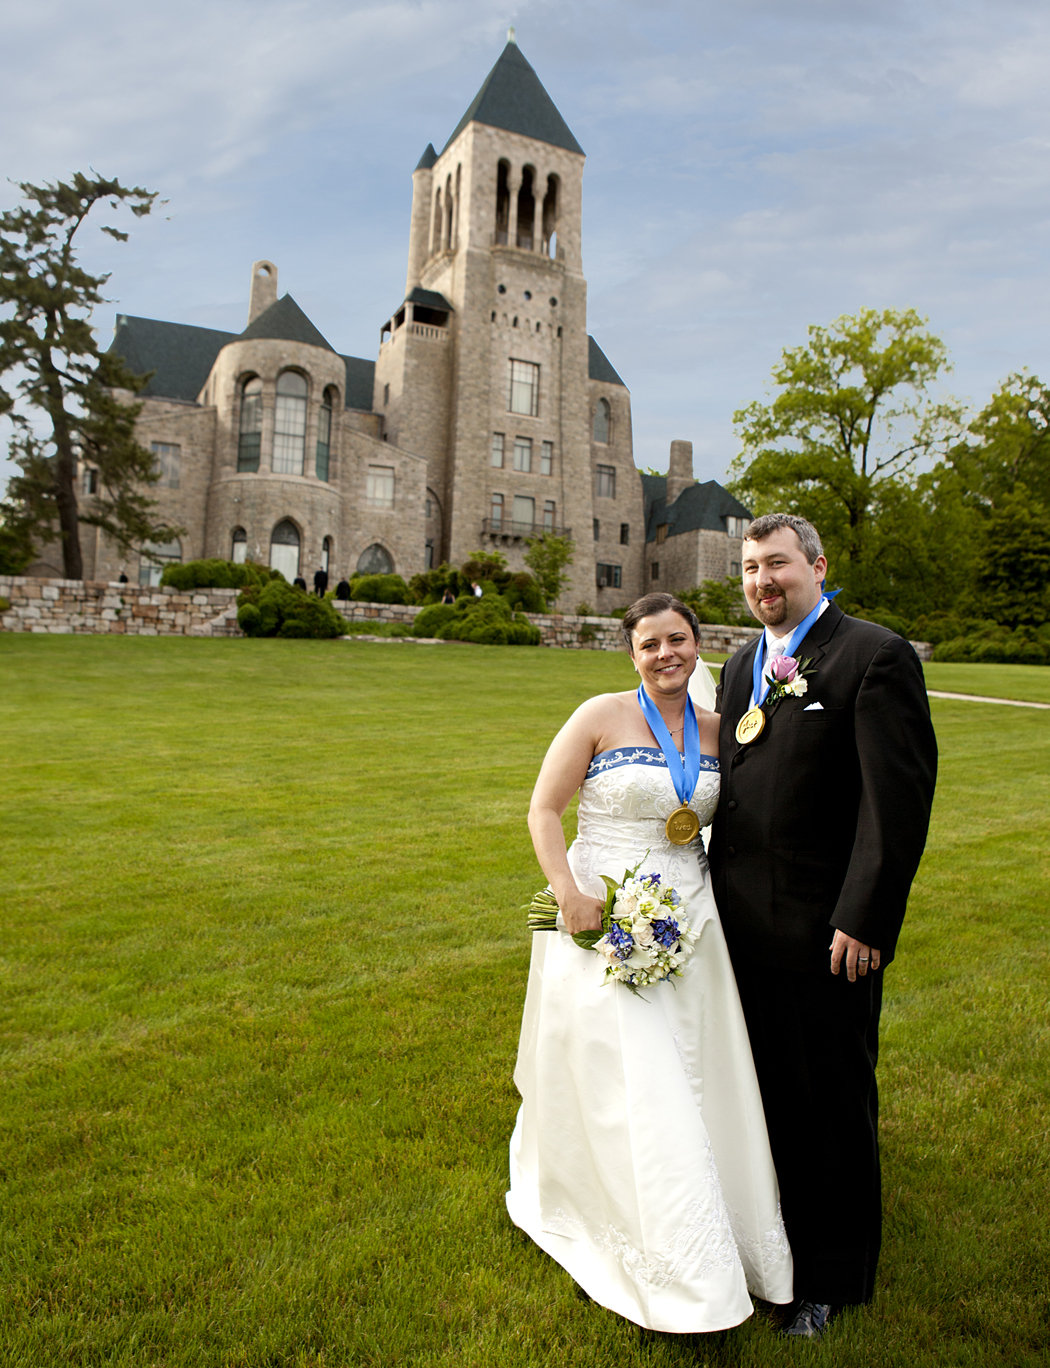 A bride and groom smile and stand hand-in-hand in a lawn, with Glencairn Museum in the background.